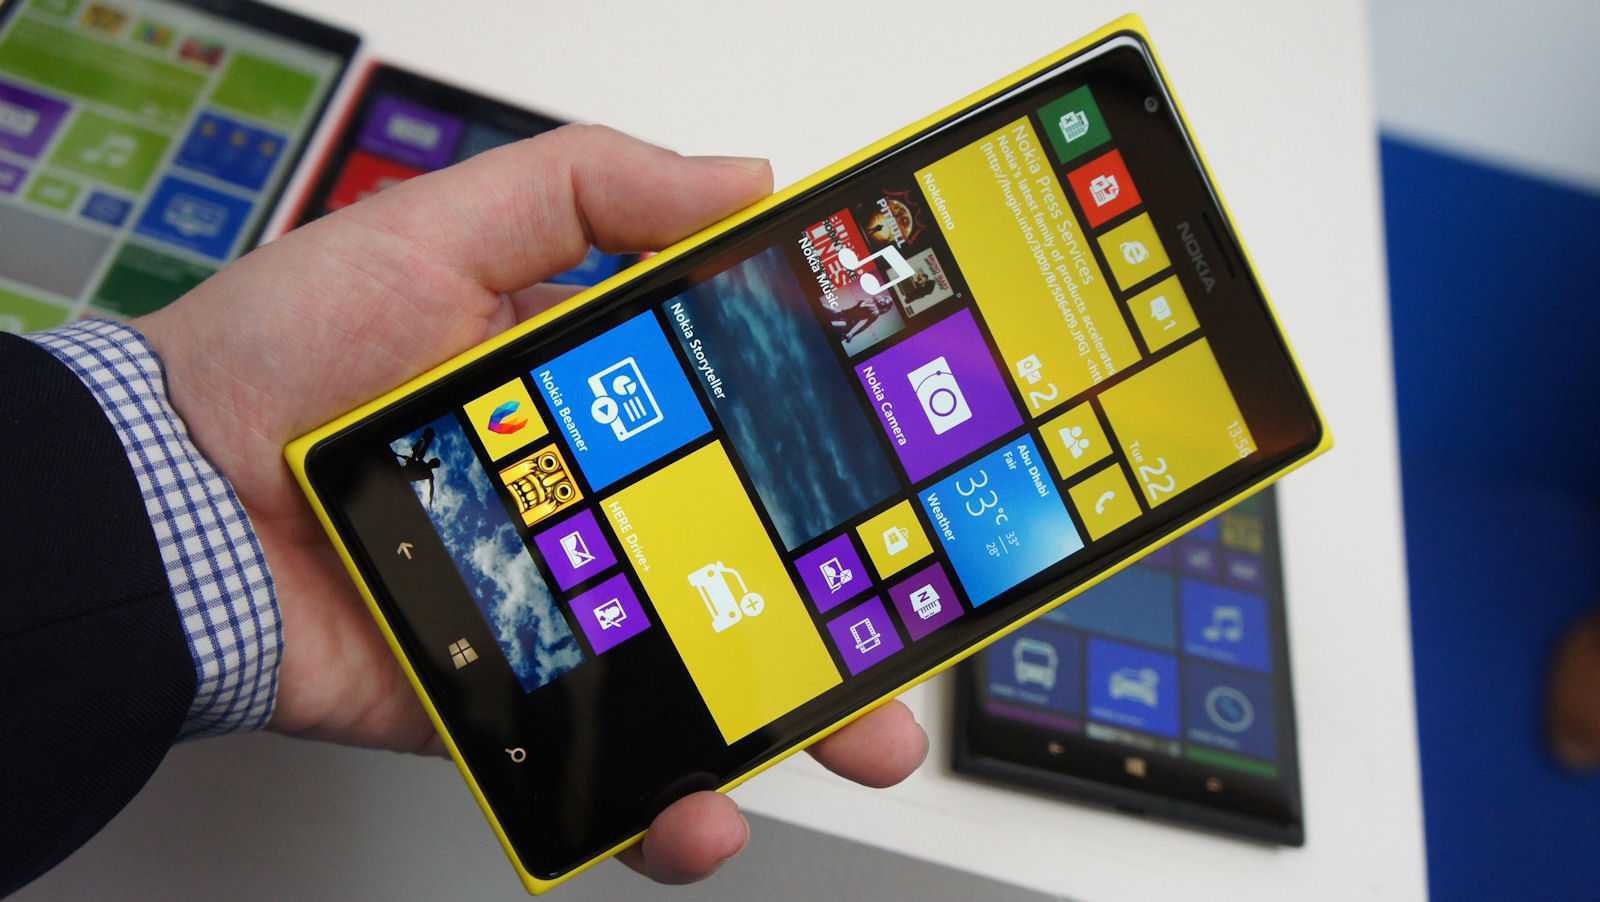 All about windows phone